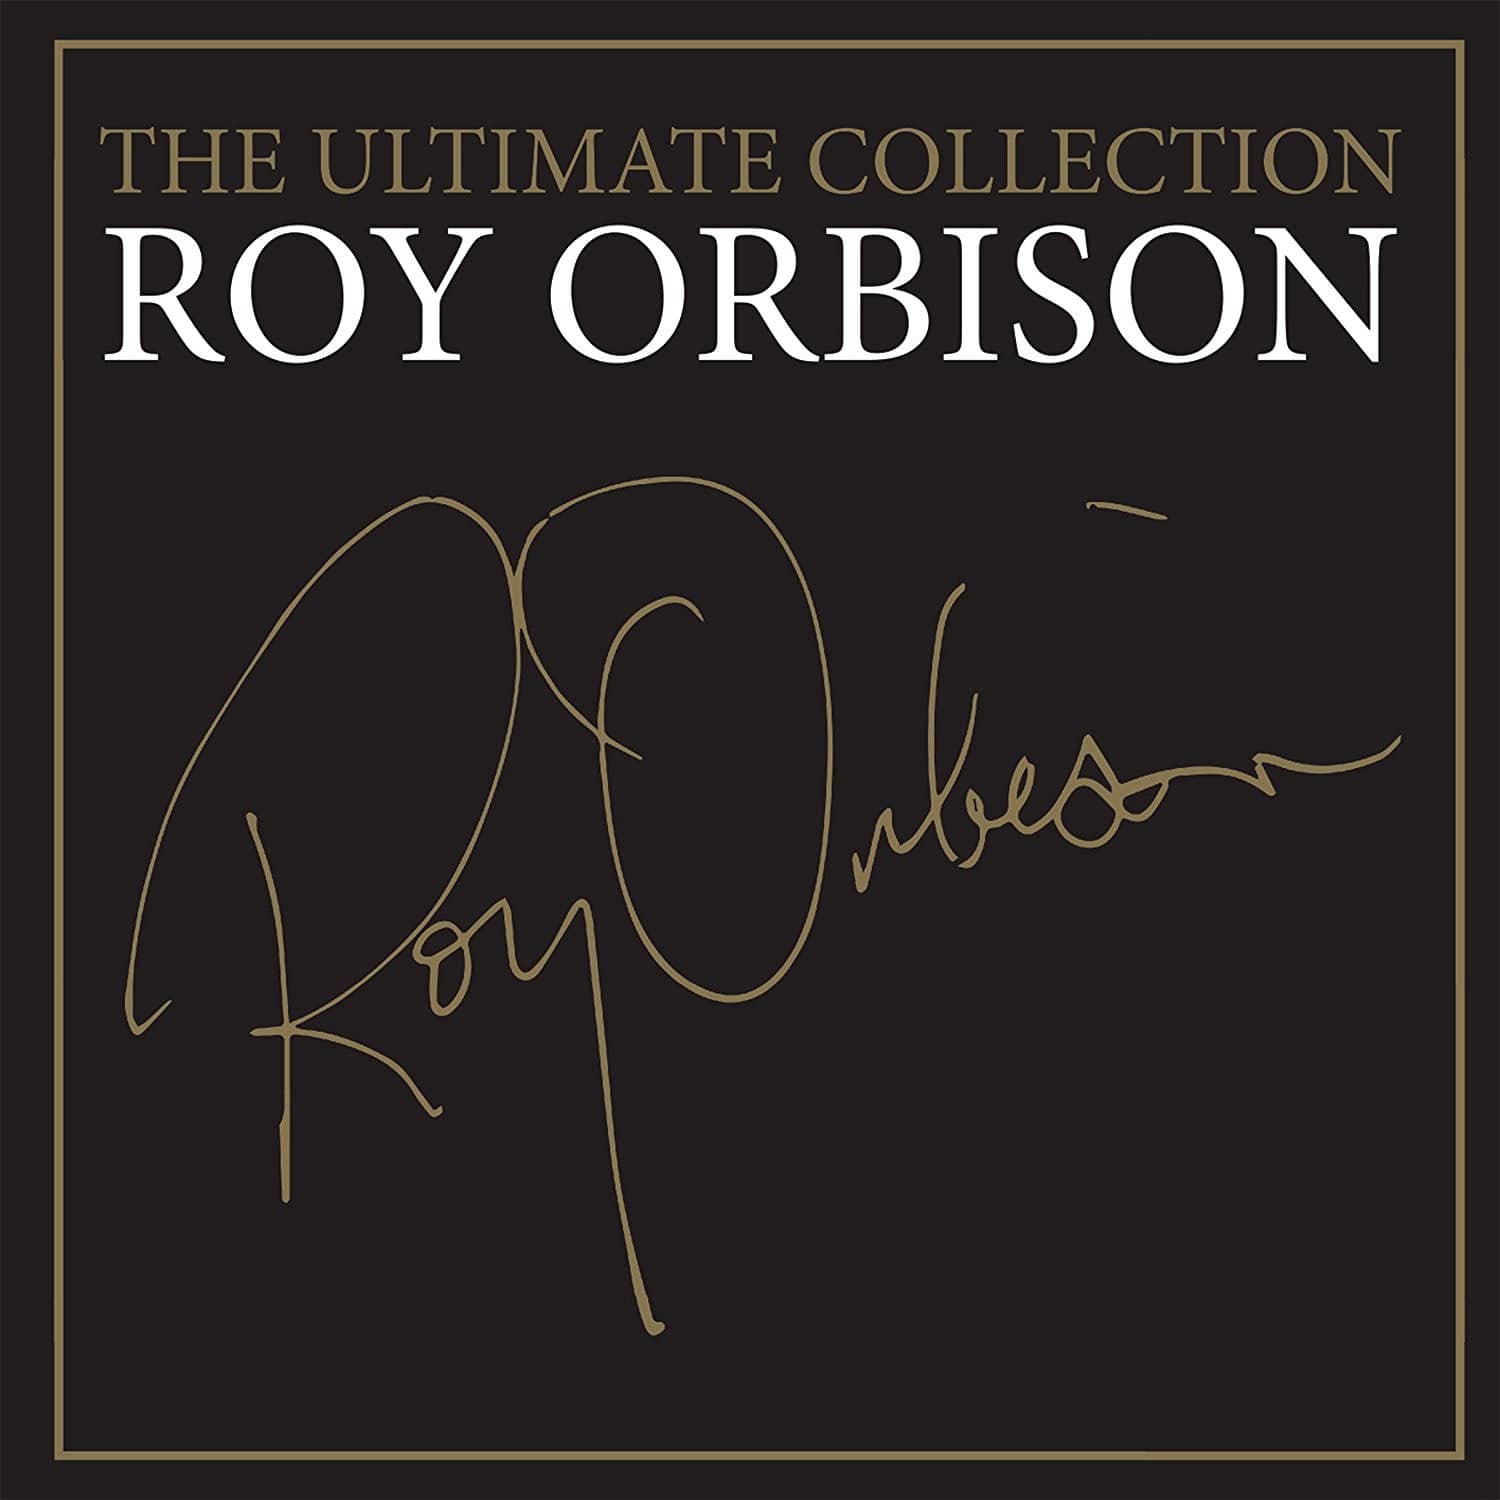 Roy Orbison: The Ultimate Collection